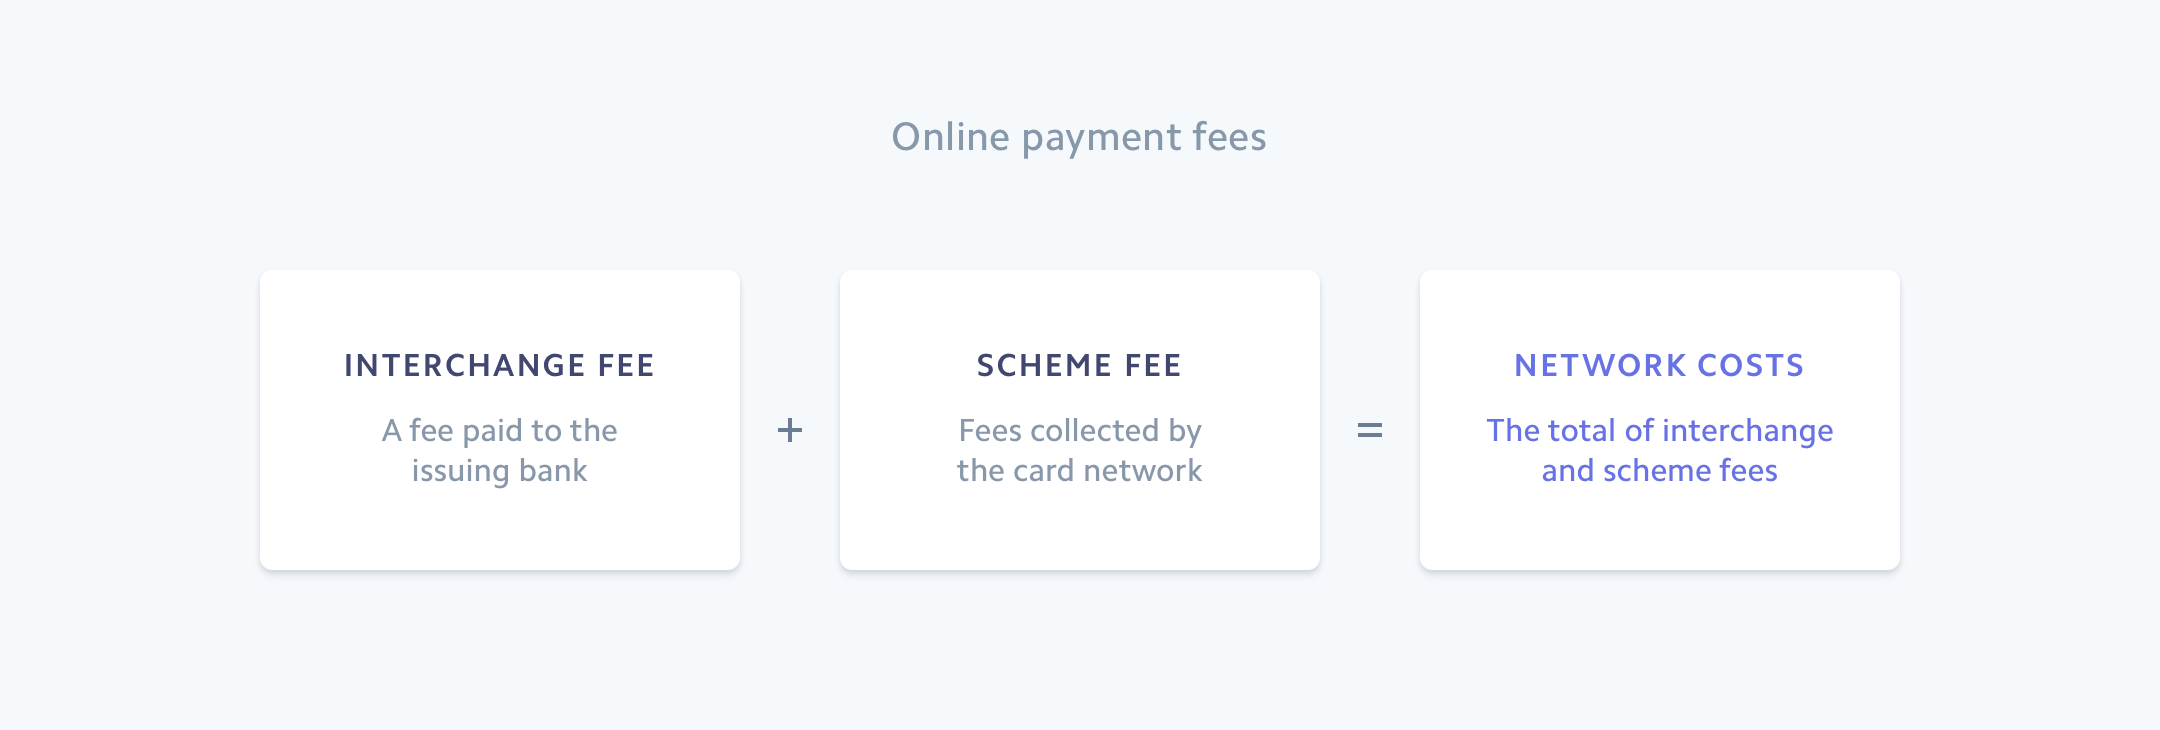 online-payment-fees.png